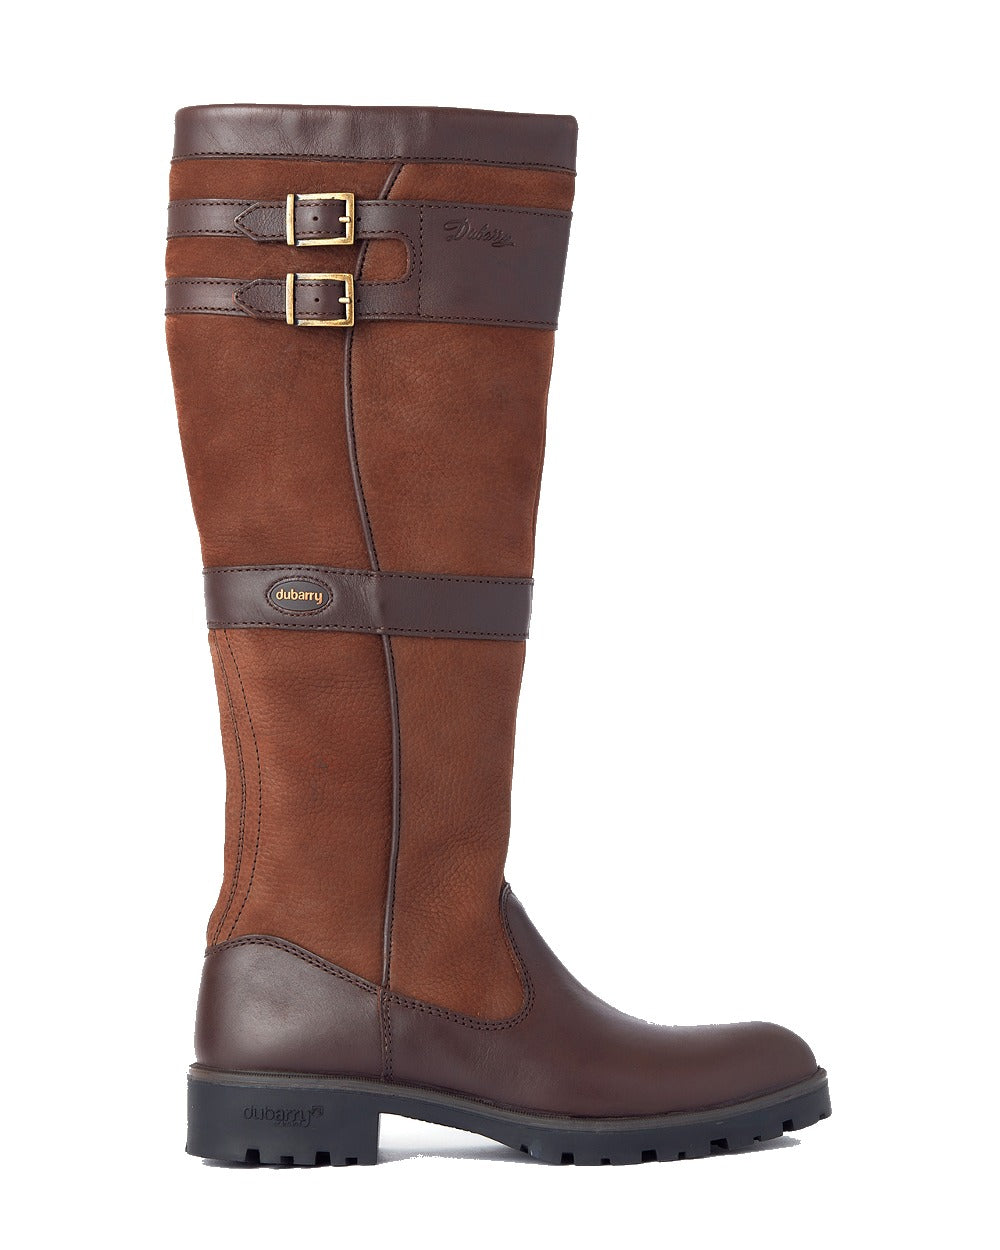 Dubarry Longford Country Boots in Walnut 